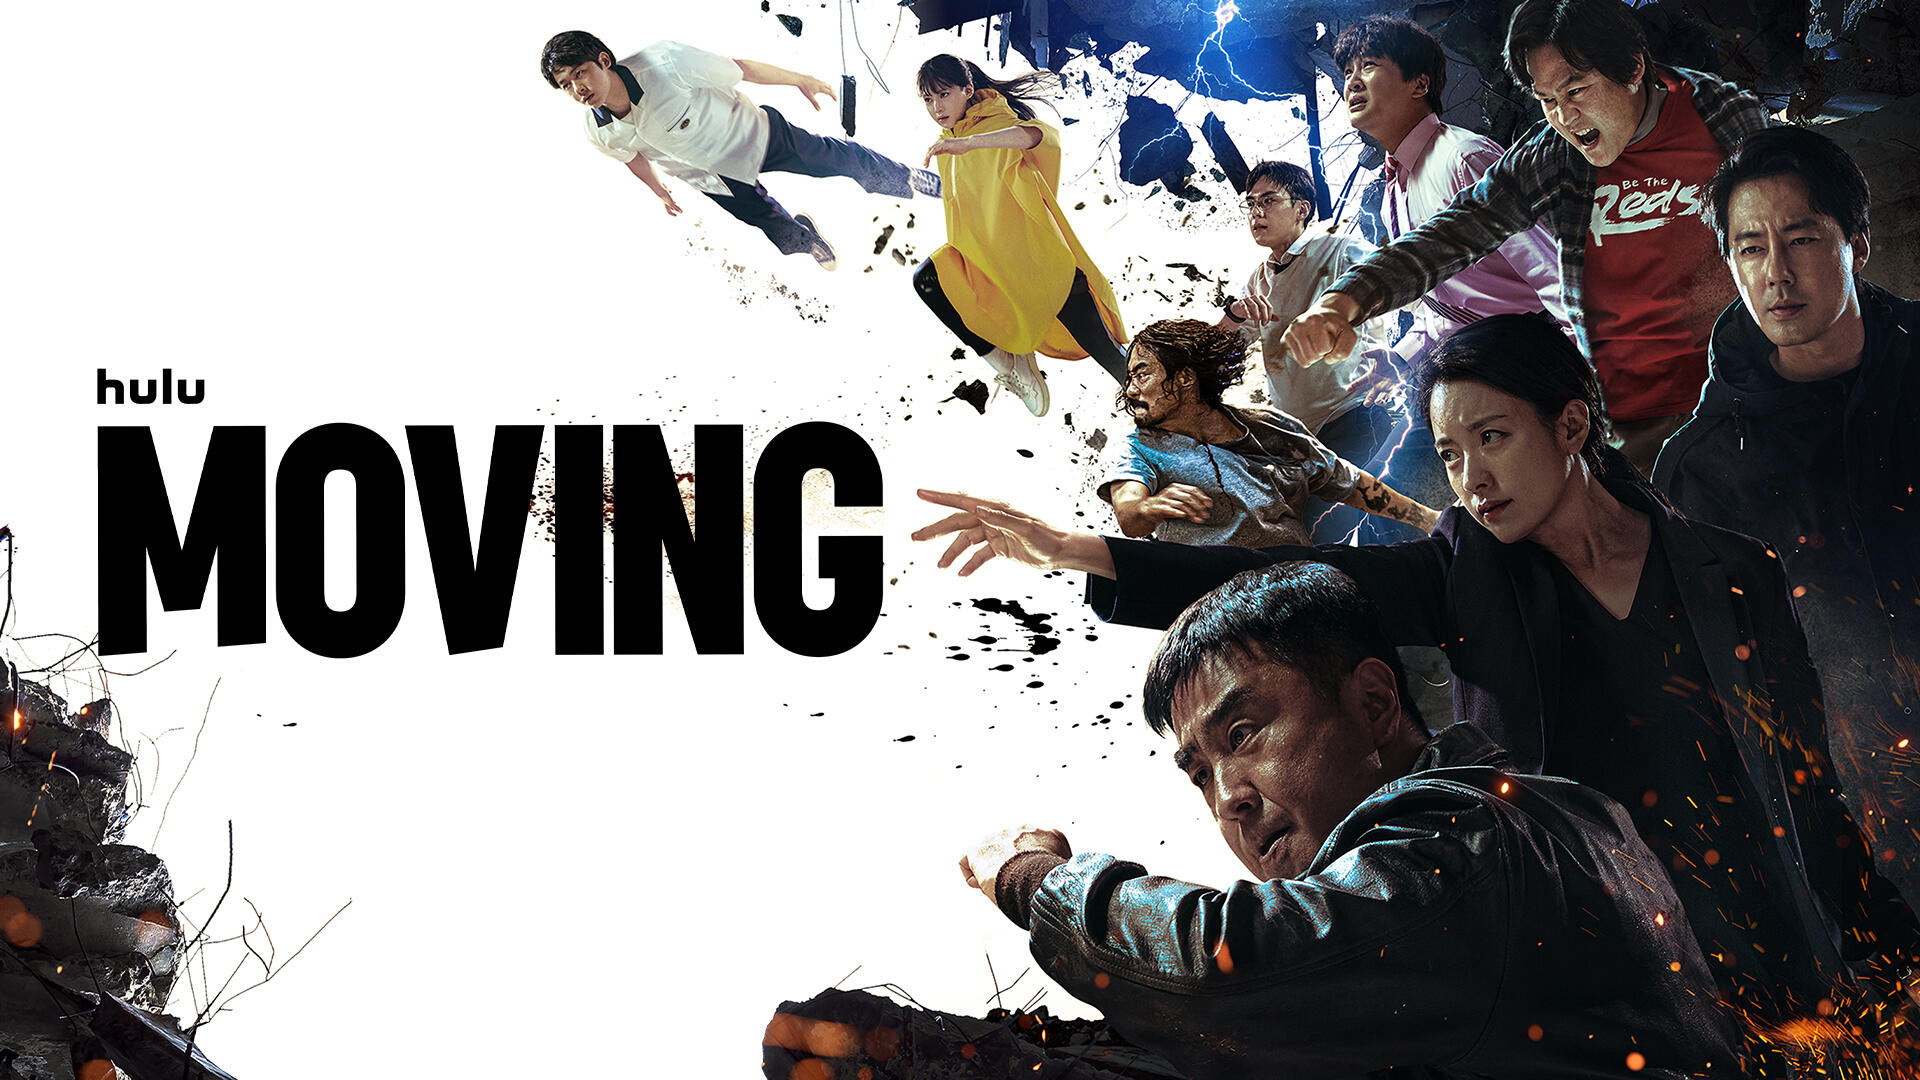 Moving -- Season 1 -- In the 1990s, South Korea’s National Security Planning Agency established a black ops team of superpowered individuals. Tasked with carrying out classified missions, members of this elite unit used their powers to defend the country and achieve the impossible on a daily basis. Despite their successes, one day the team suddenly went dark, dispersing across the country, never to be heard from again. (Courtesy of Hulu)